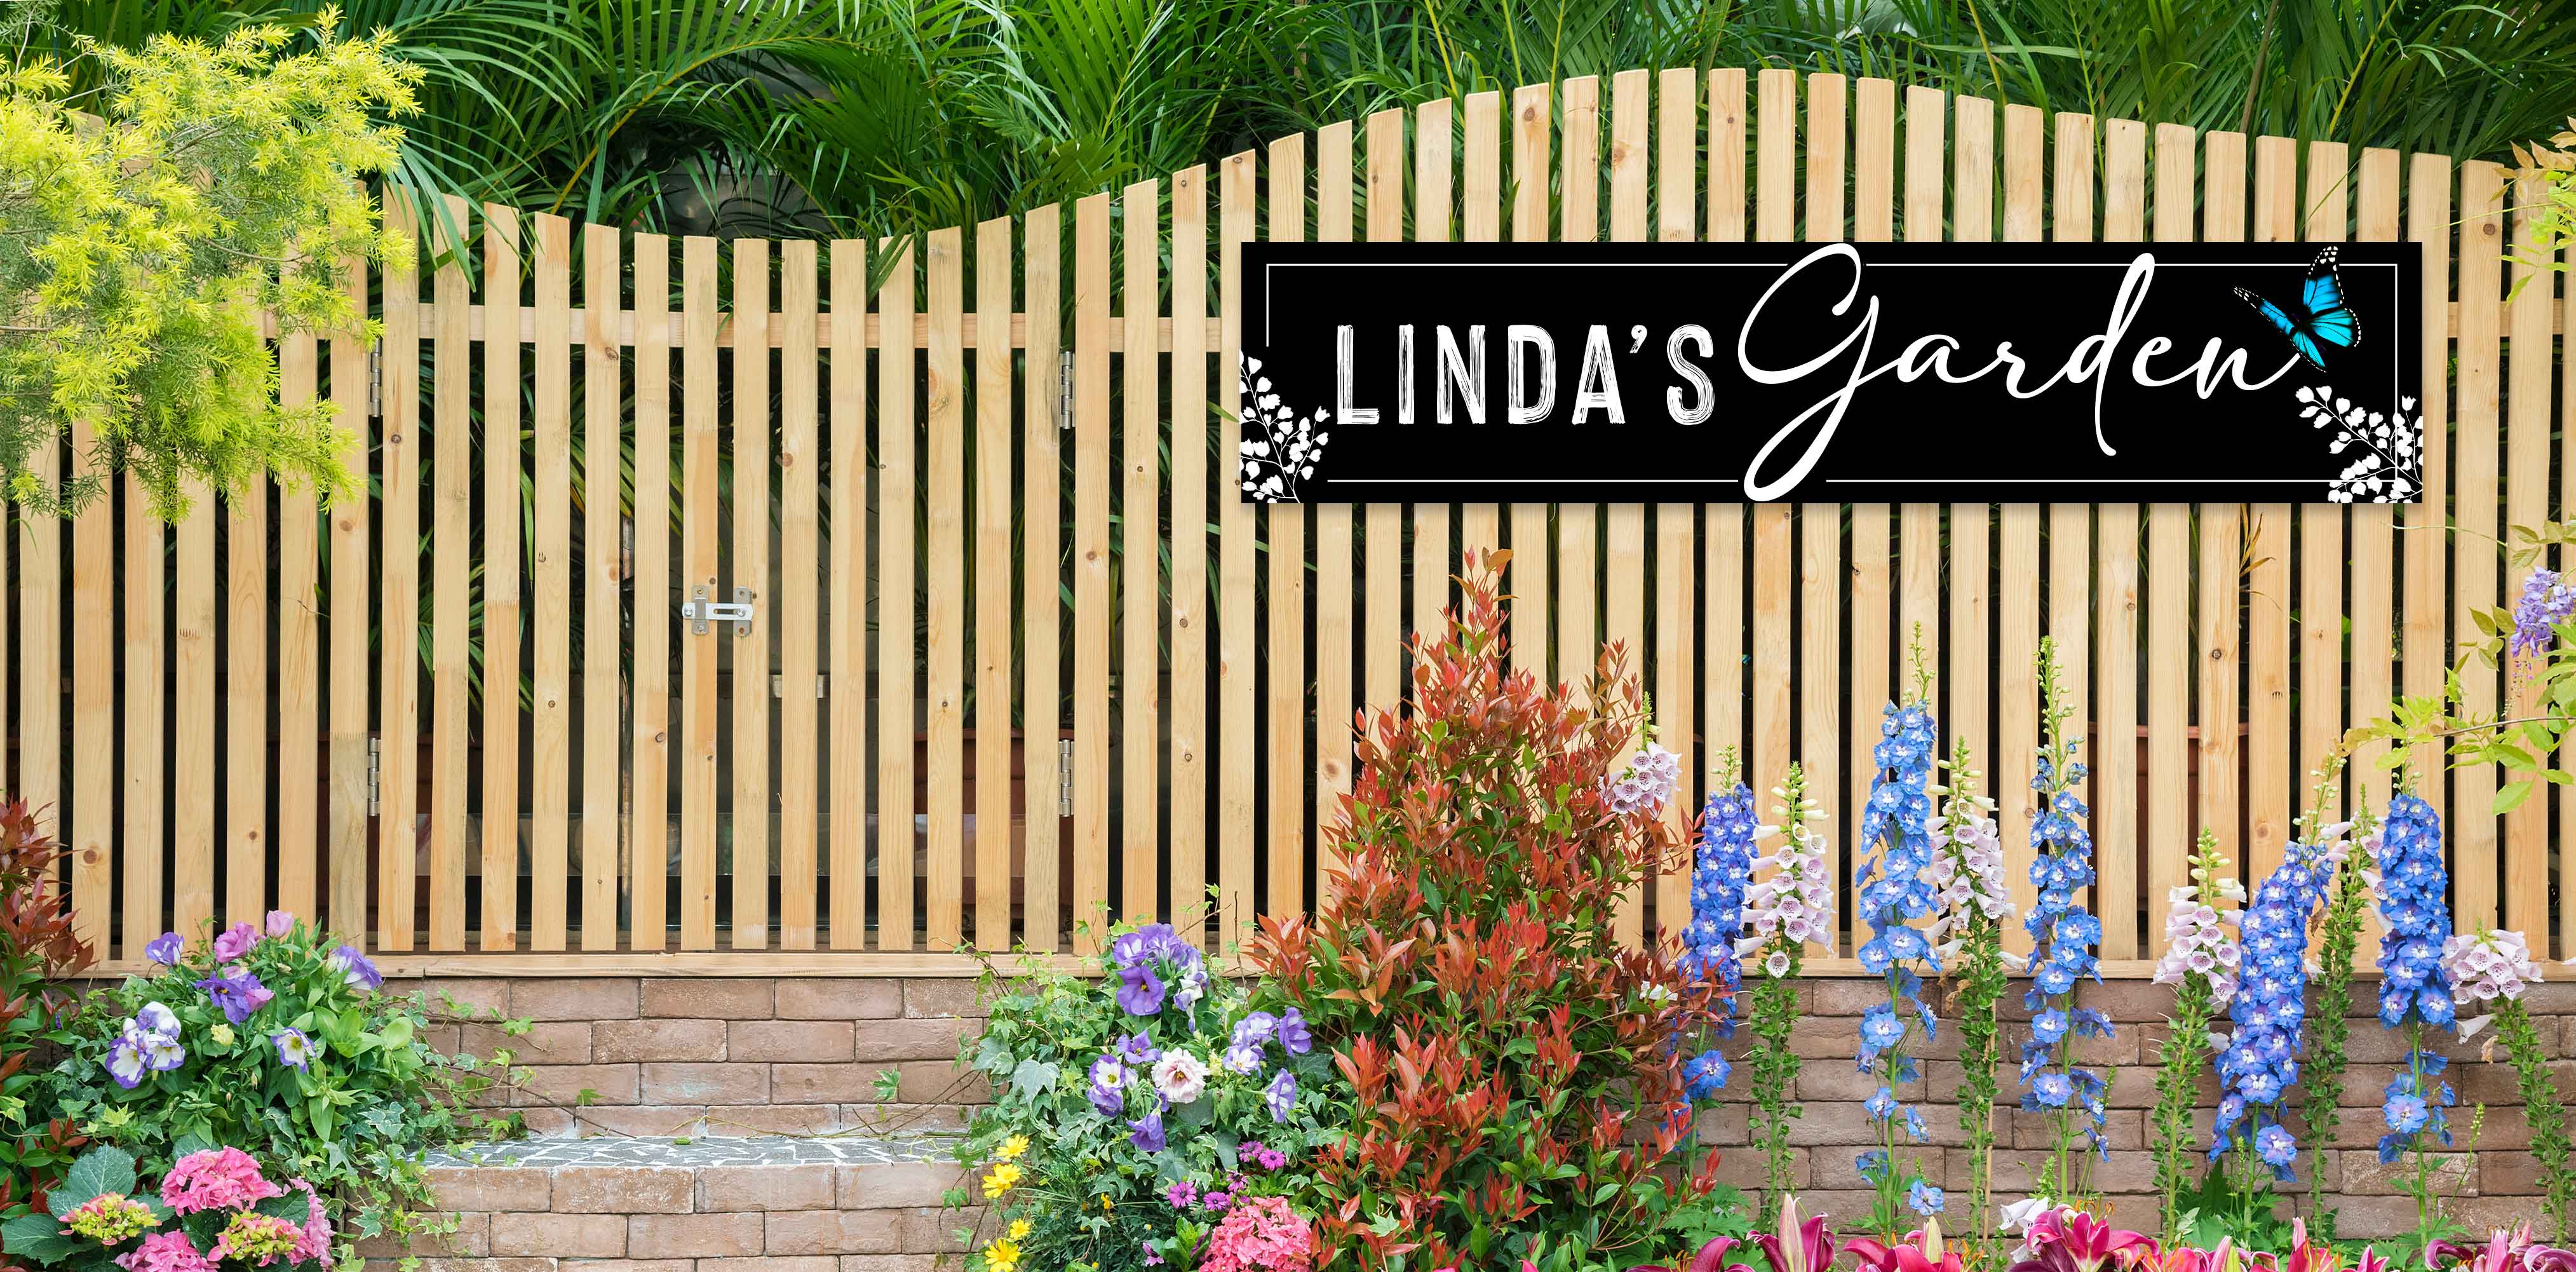 garden signs personalized on a wooden fence in a flower garden